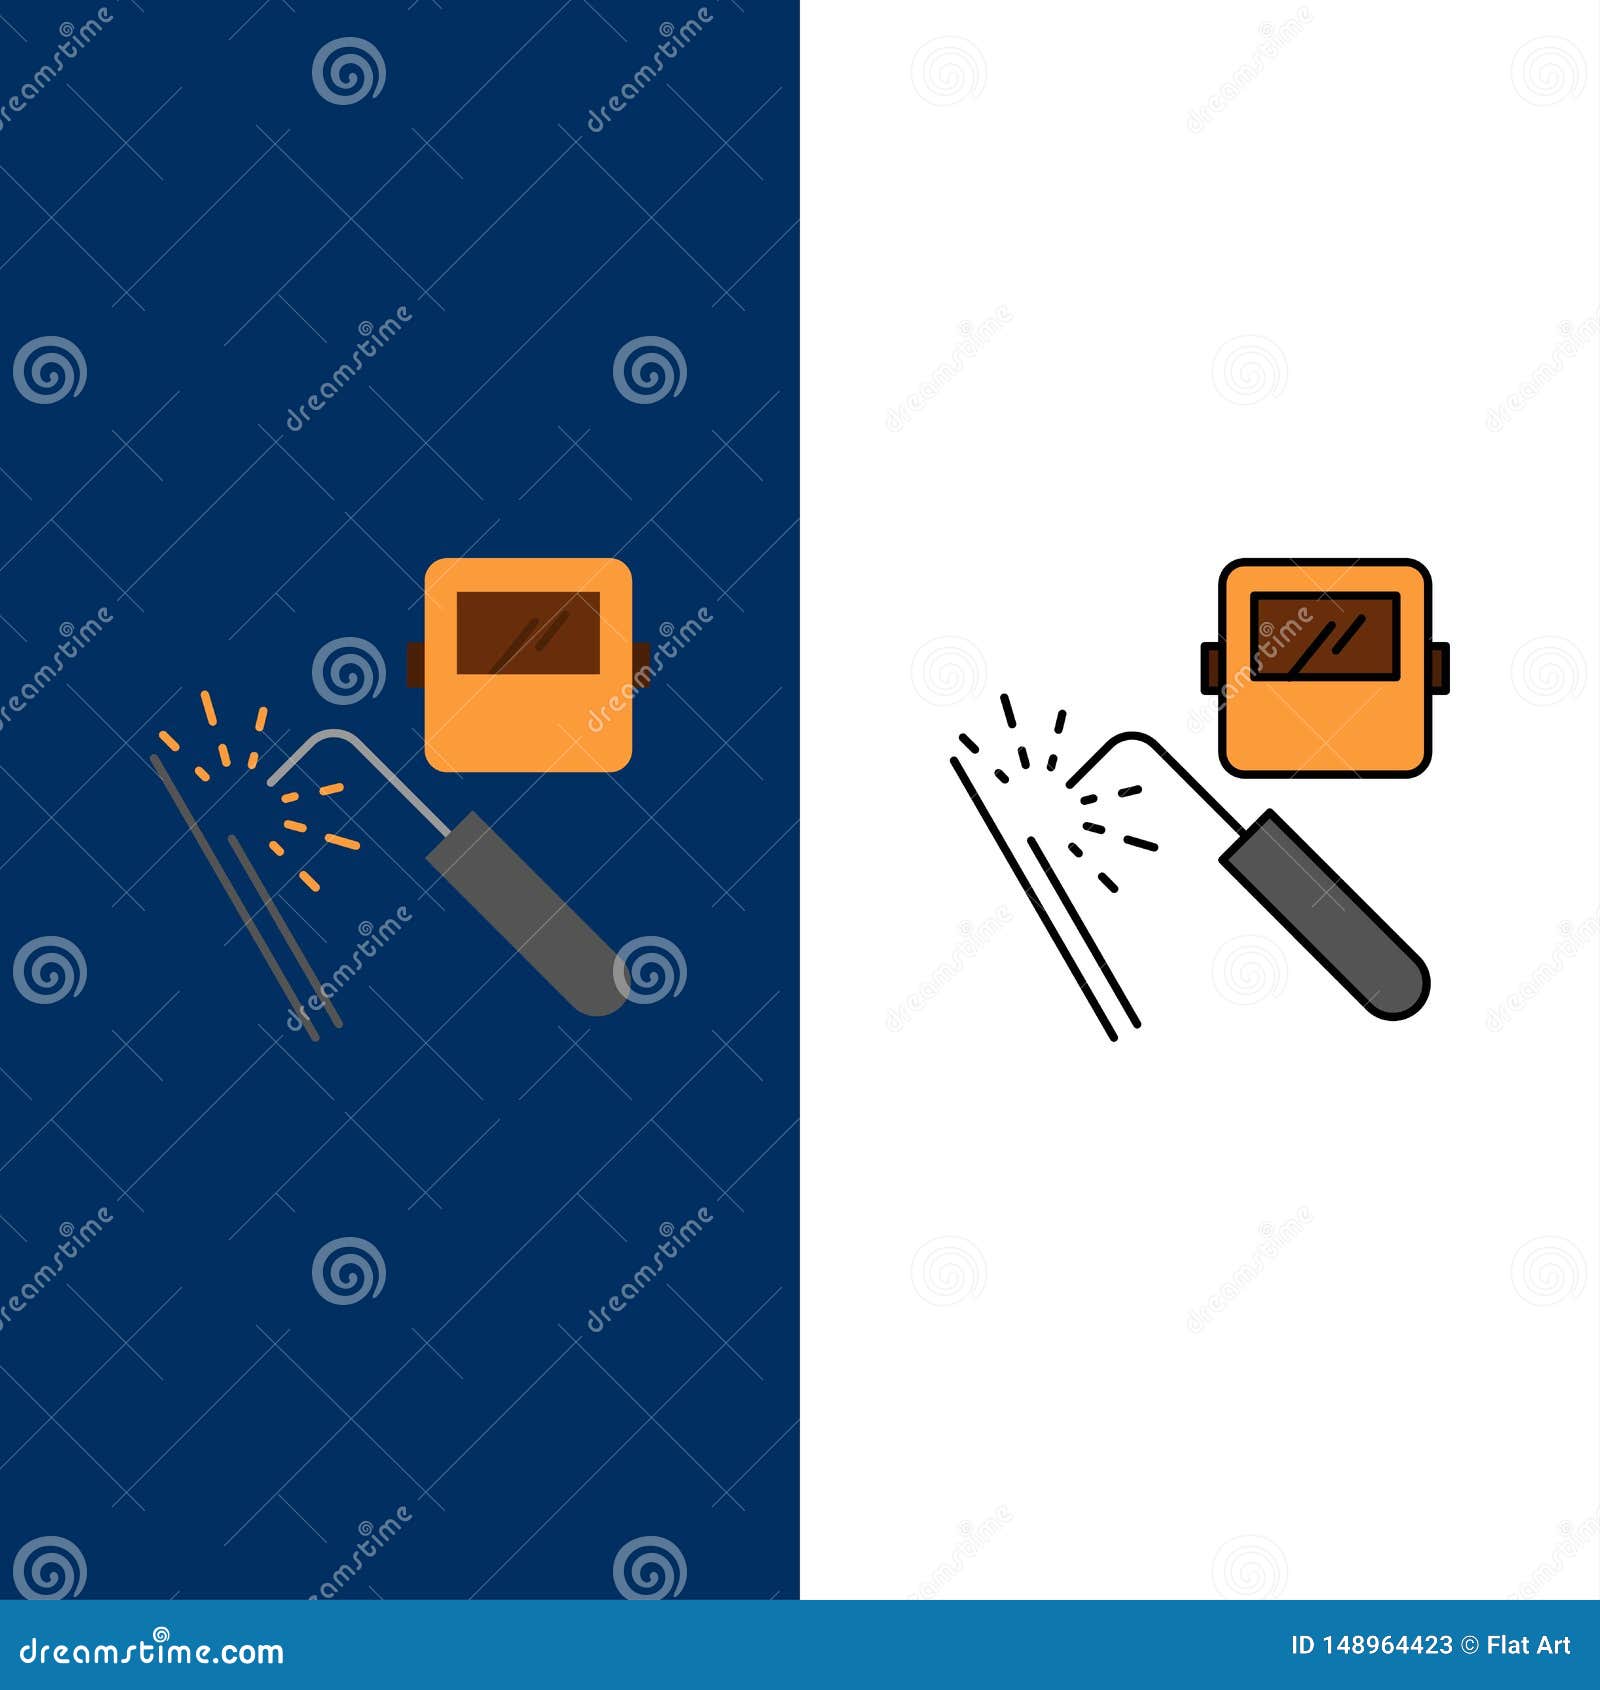 Vector Arc Flash Safety Icons Stock Illustrations – 46 Vector Arc Flash  Safety Icons Stock Illustrations, Vectors & Clipart - Dreamstime